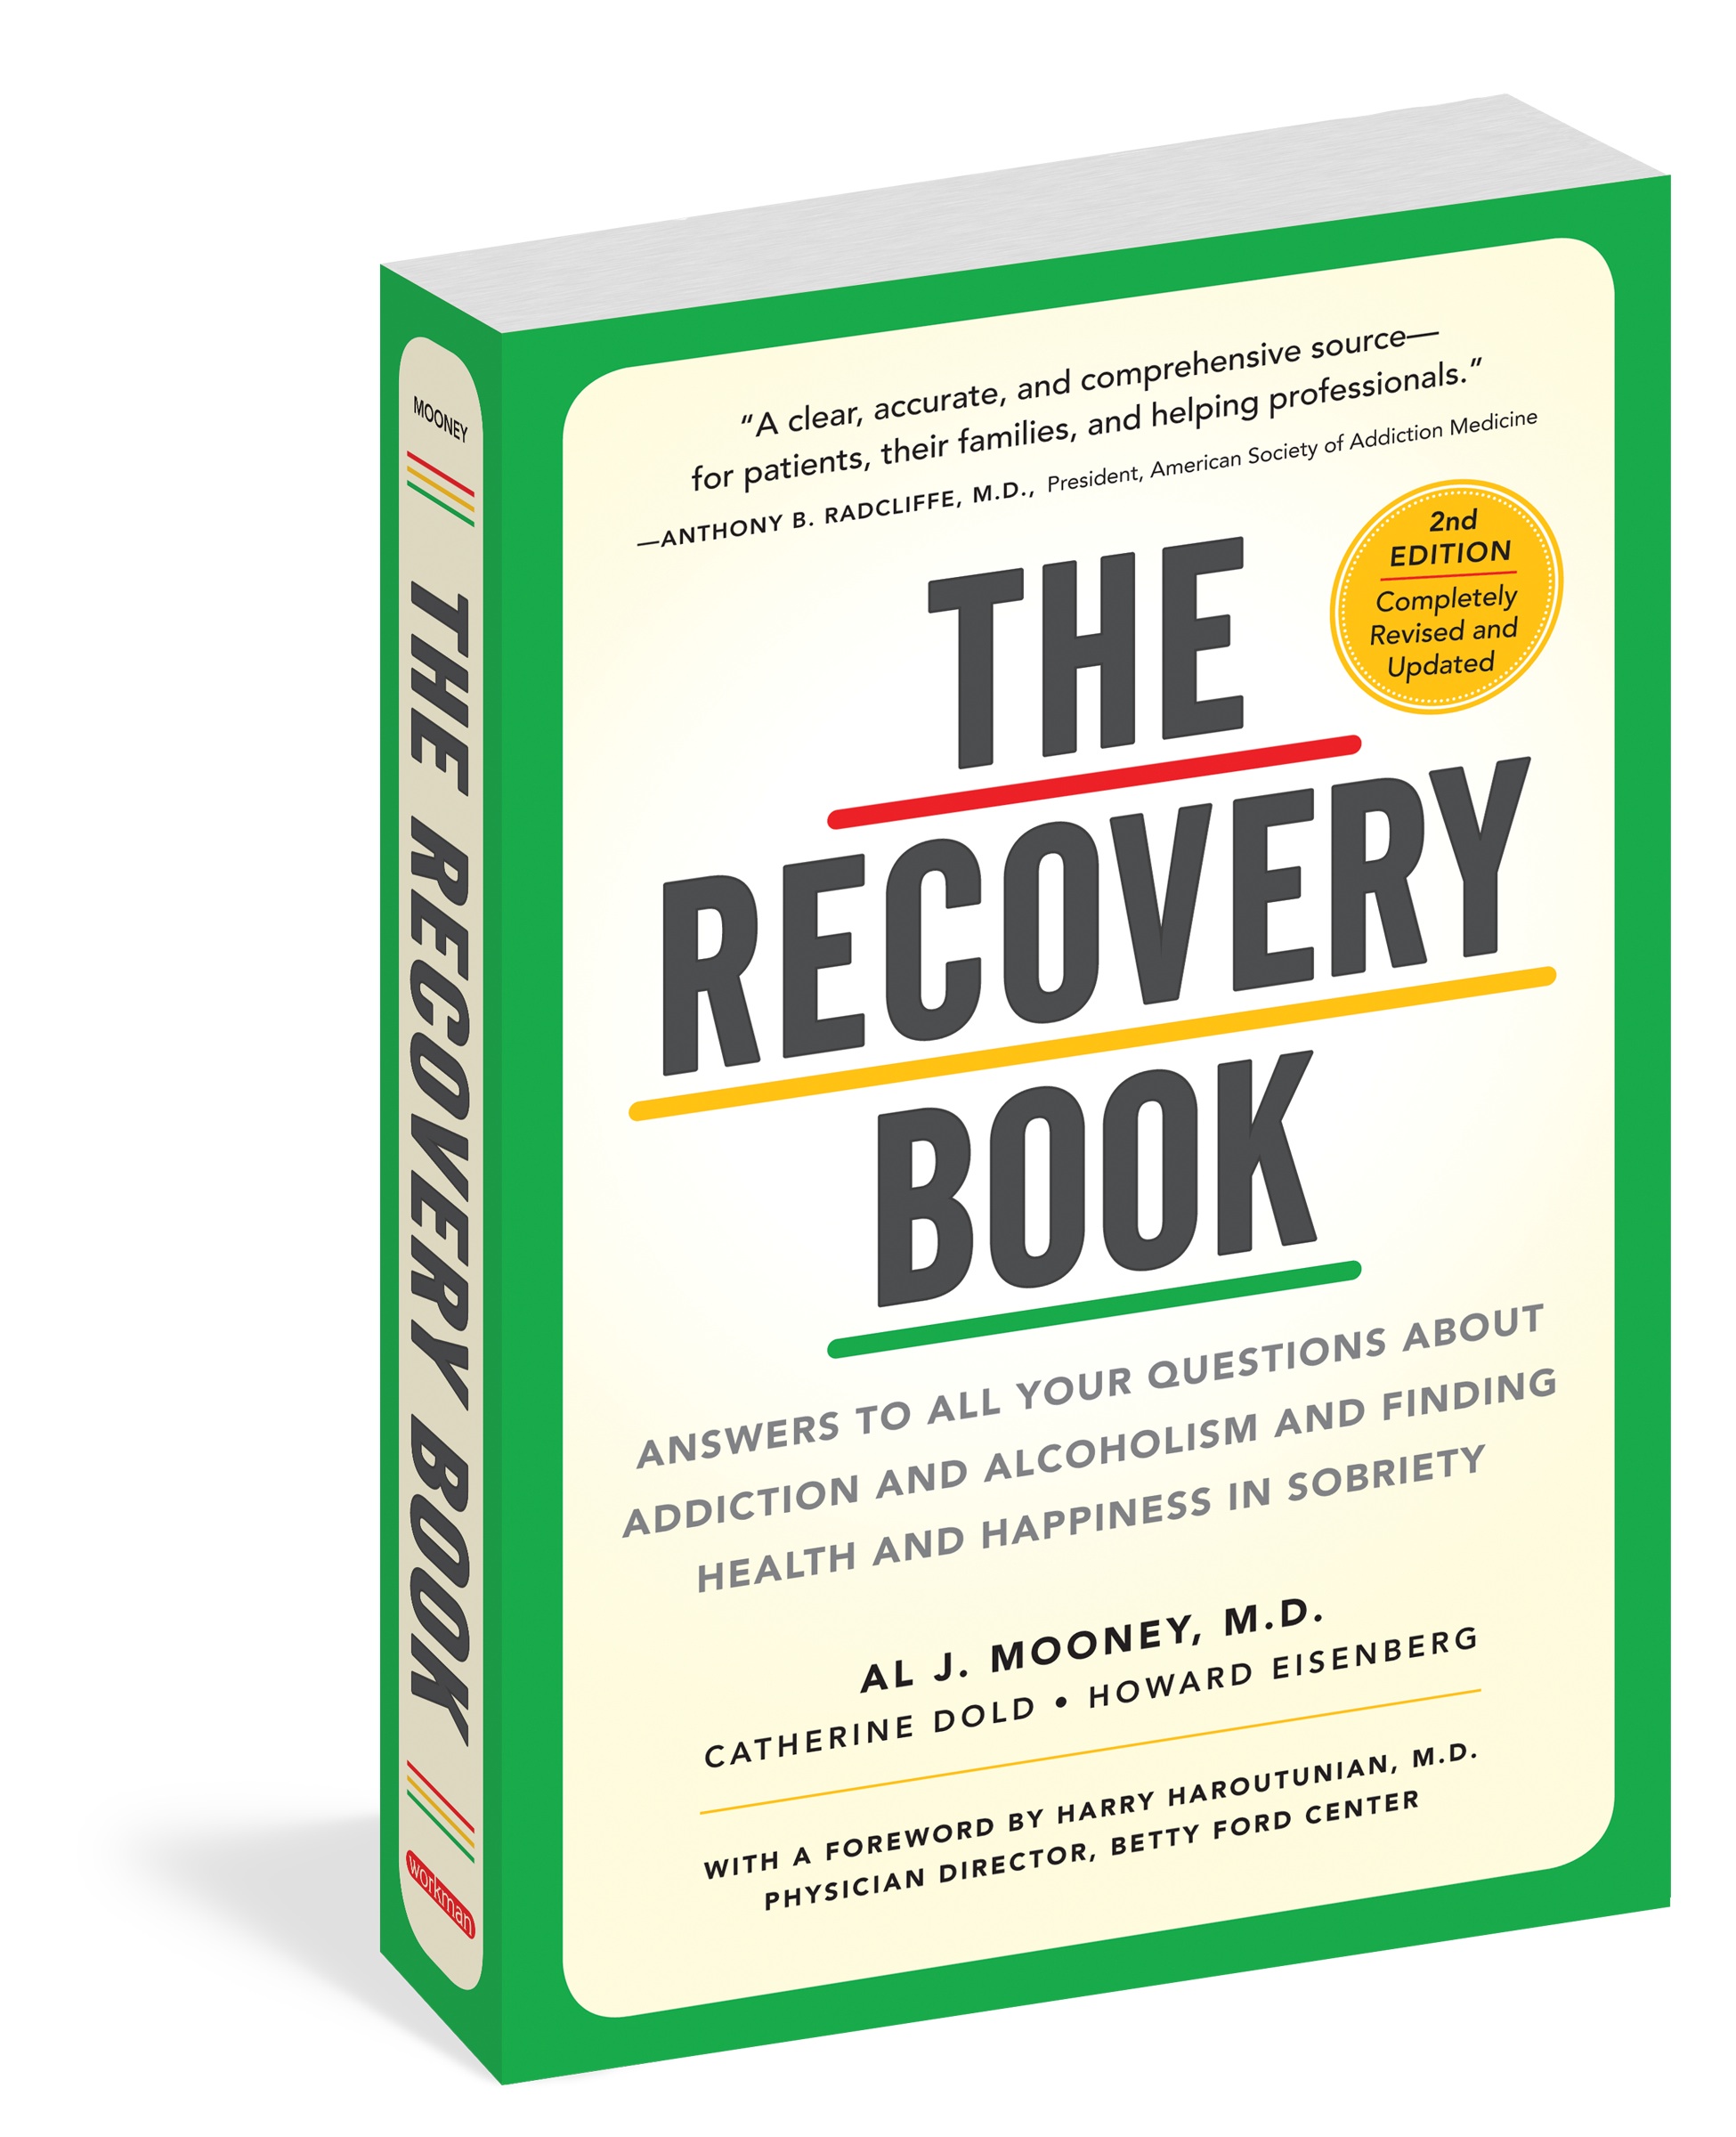 2nd edition of The Recovery Book